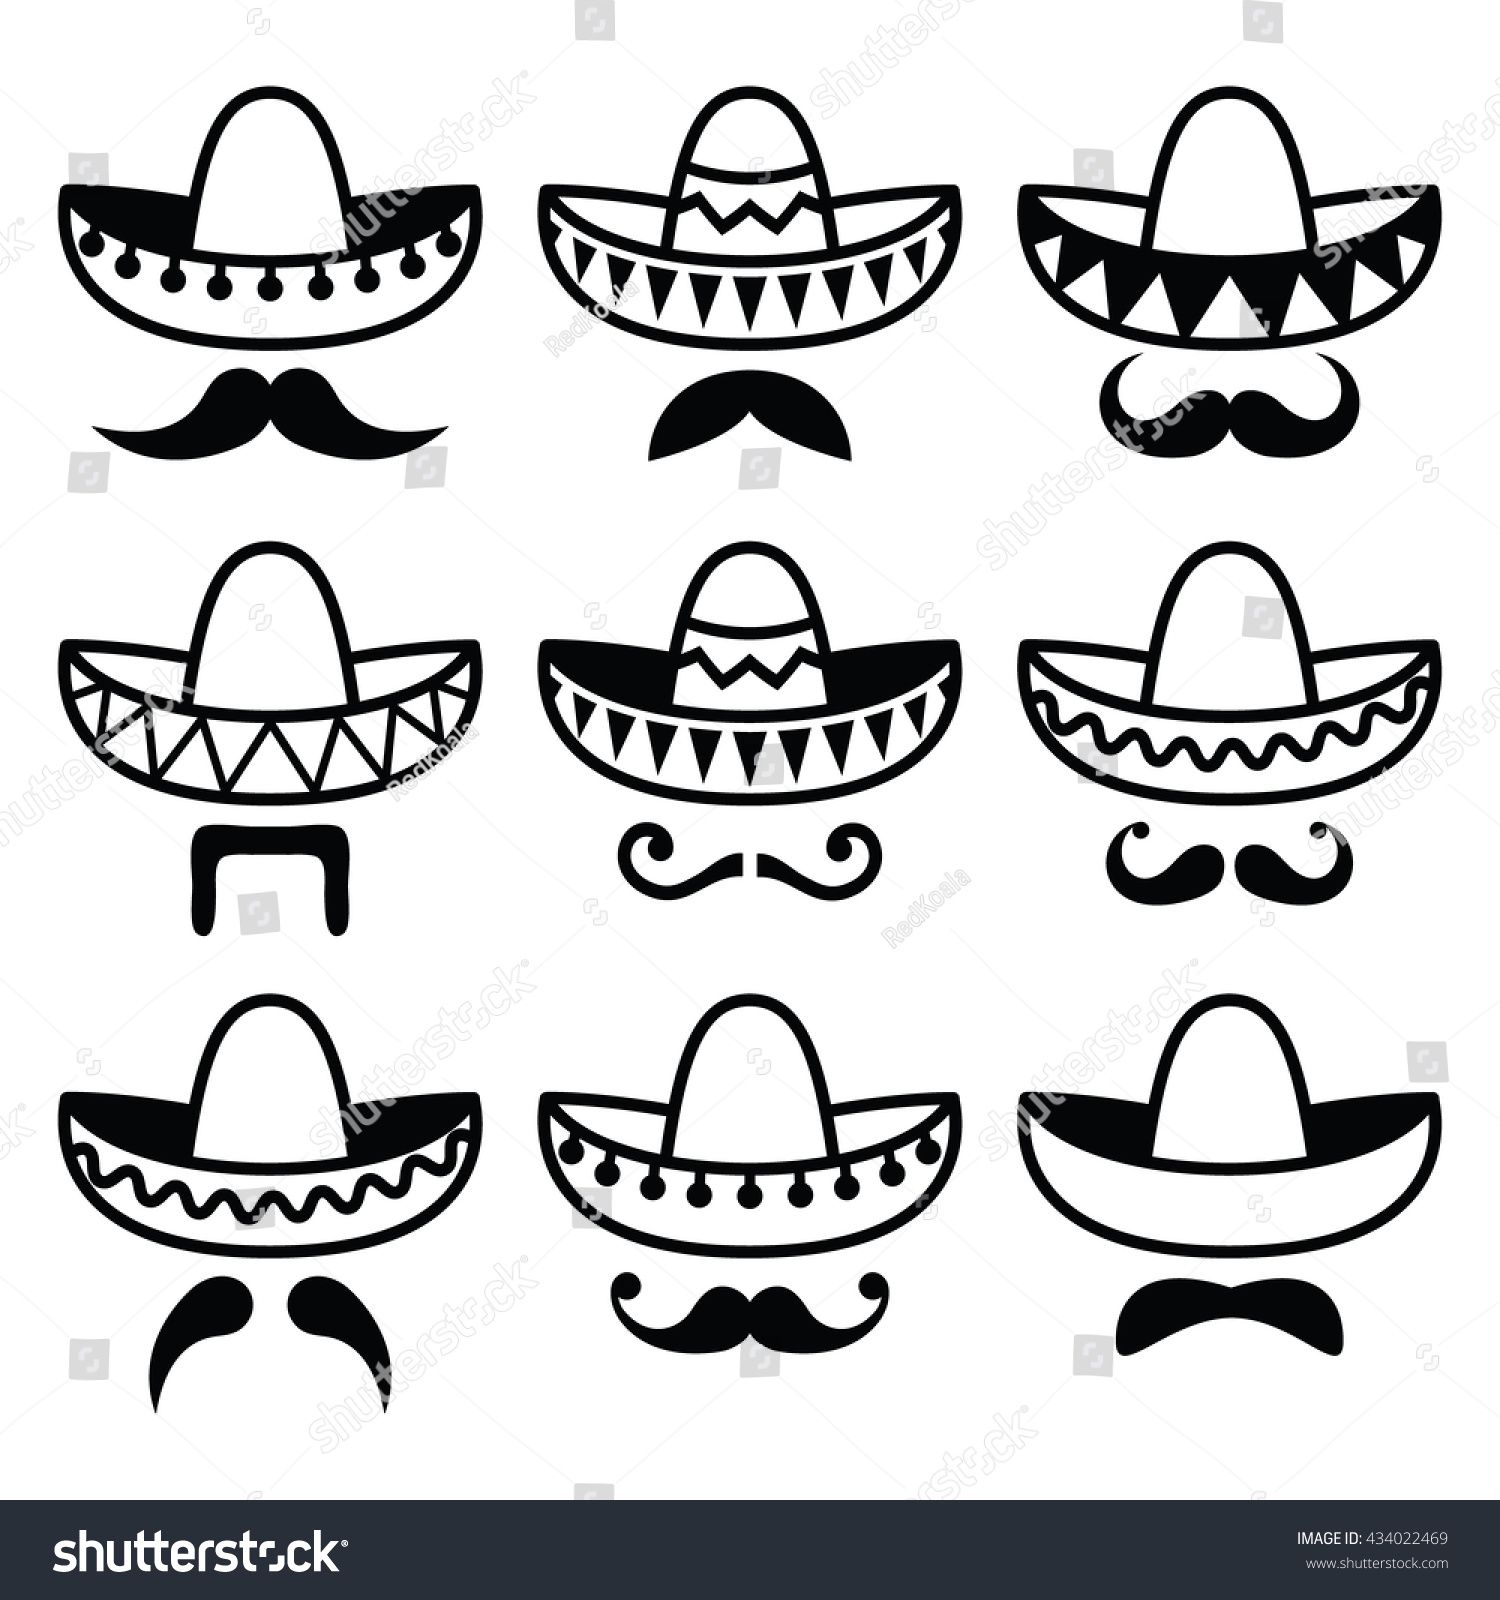 Mexican hat with moustache. Mustache clipart sombrero